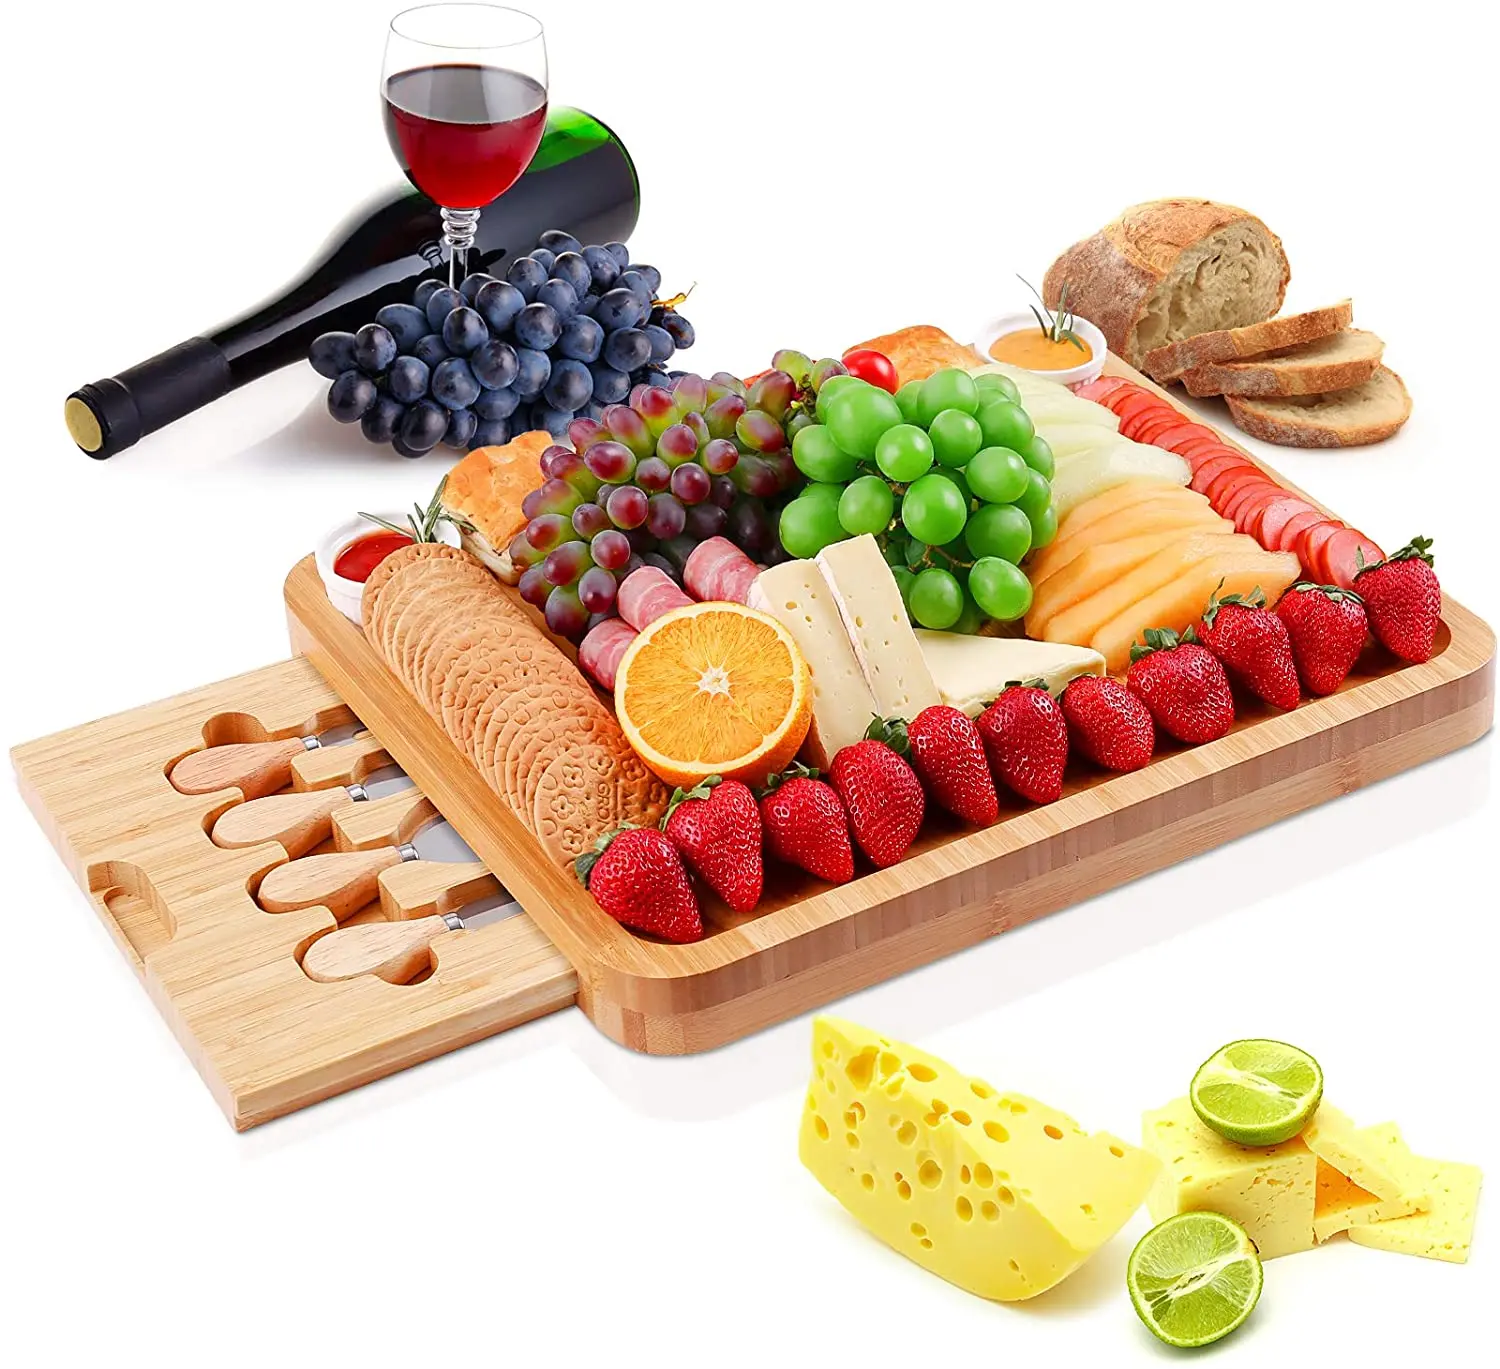 
Wholesale Large Charcuterie Board with Ceramic Bowls Bamboo Cheese Cutting Board Set and Cutlery Knife for Serving Tray 